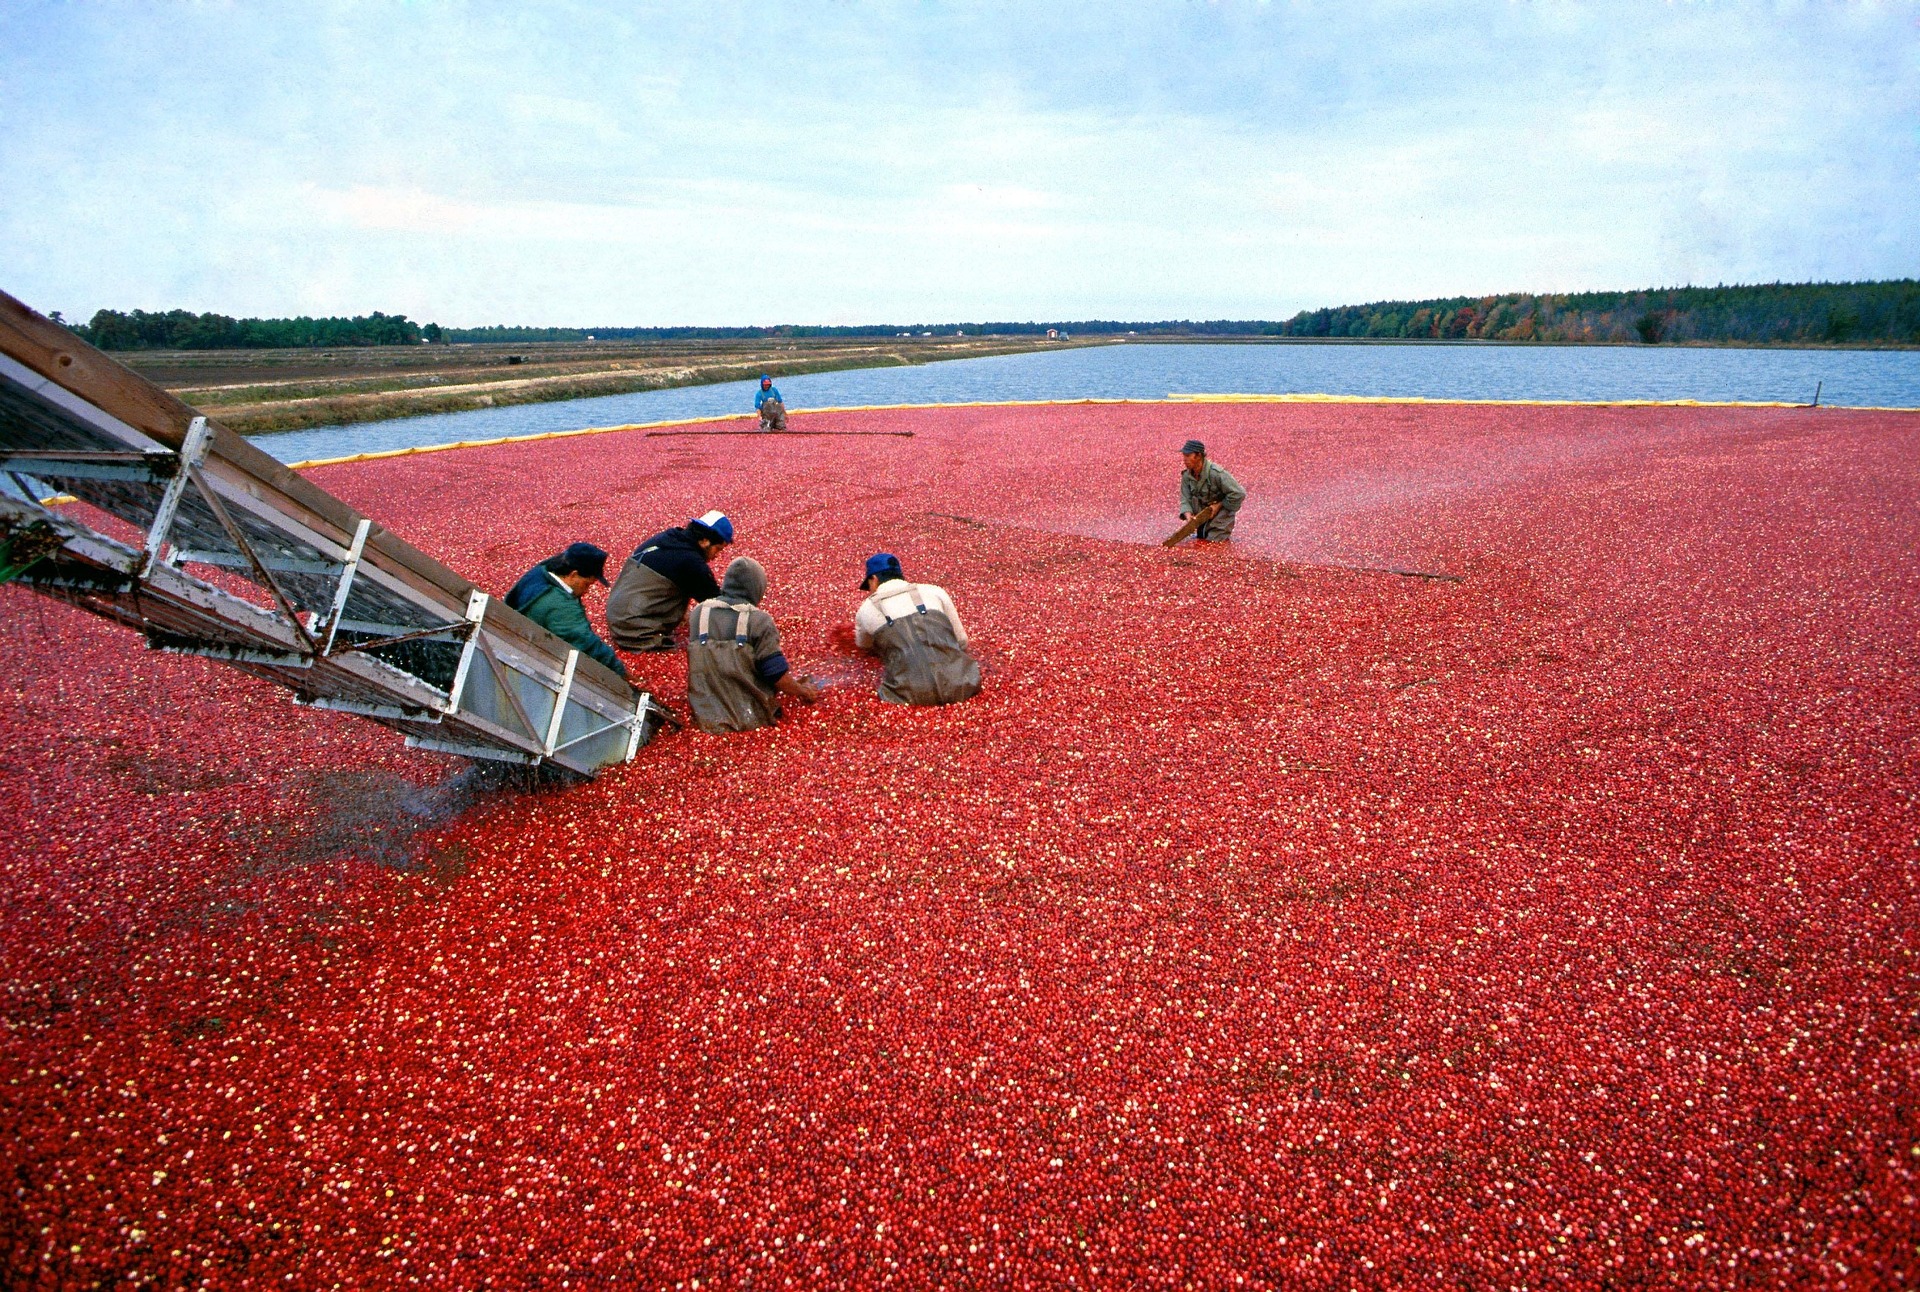 A cranberry bed with people in it 